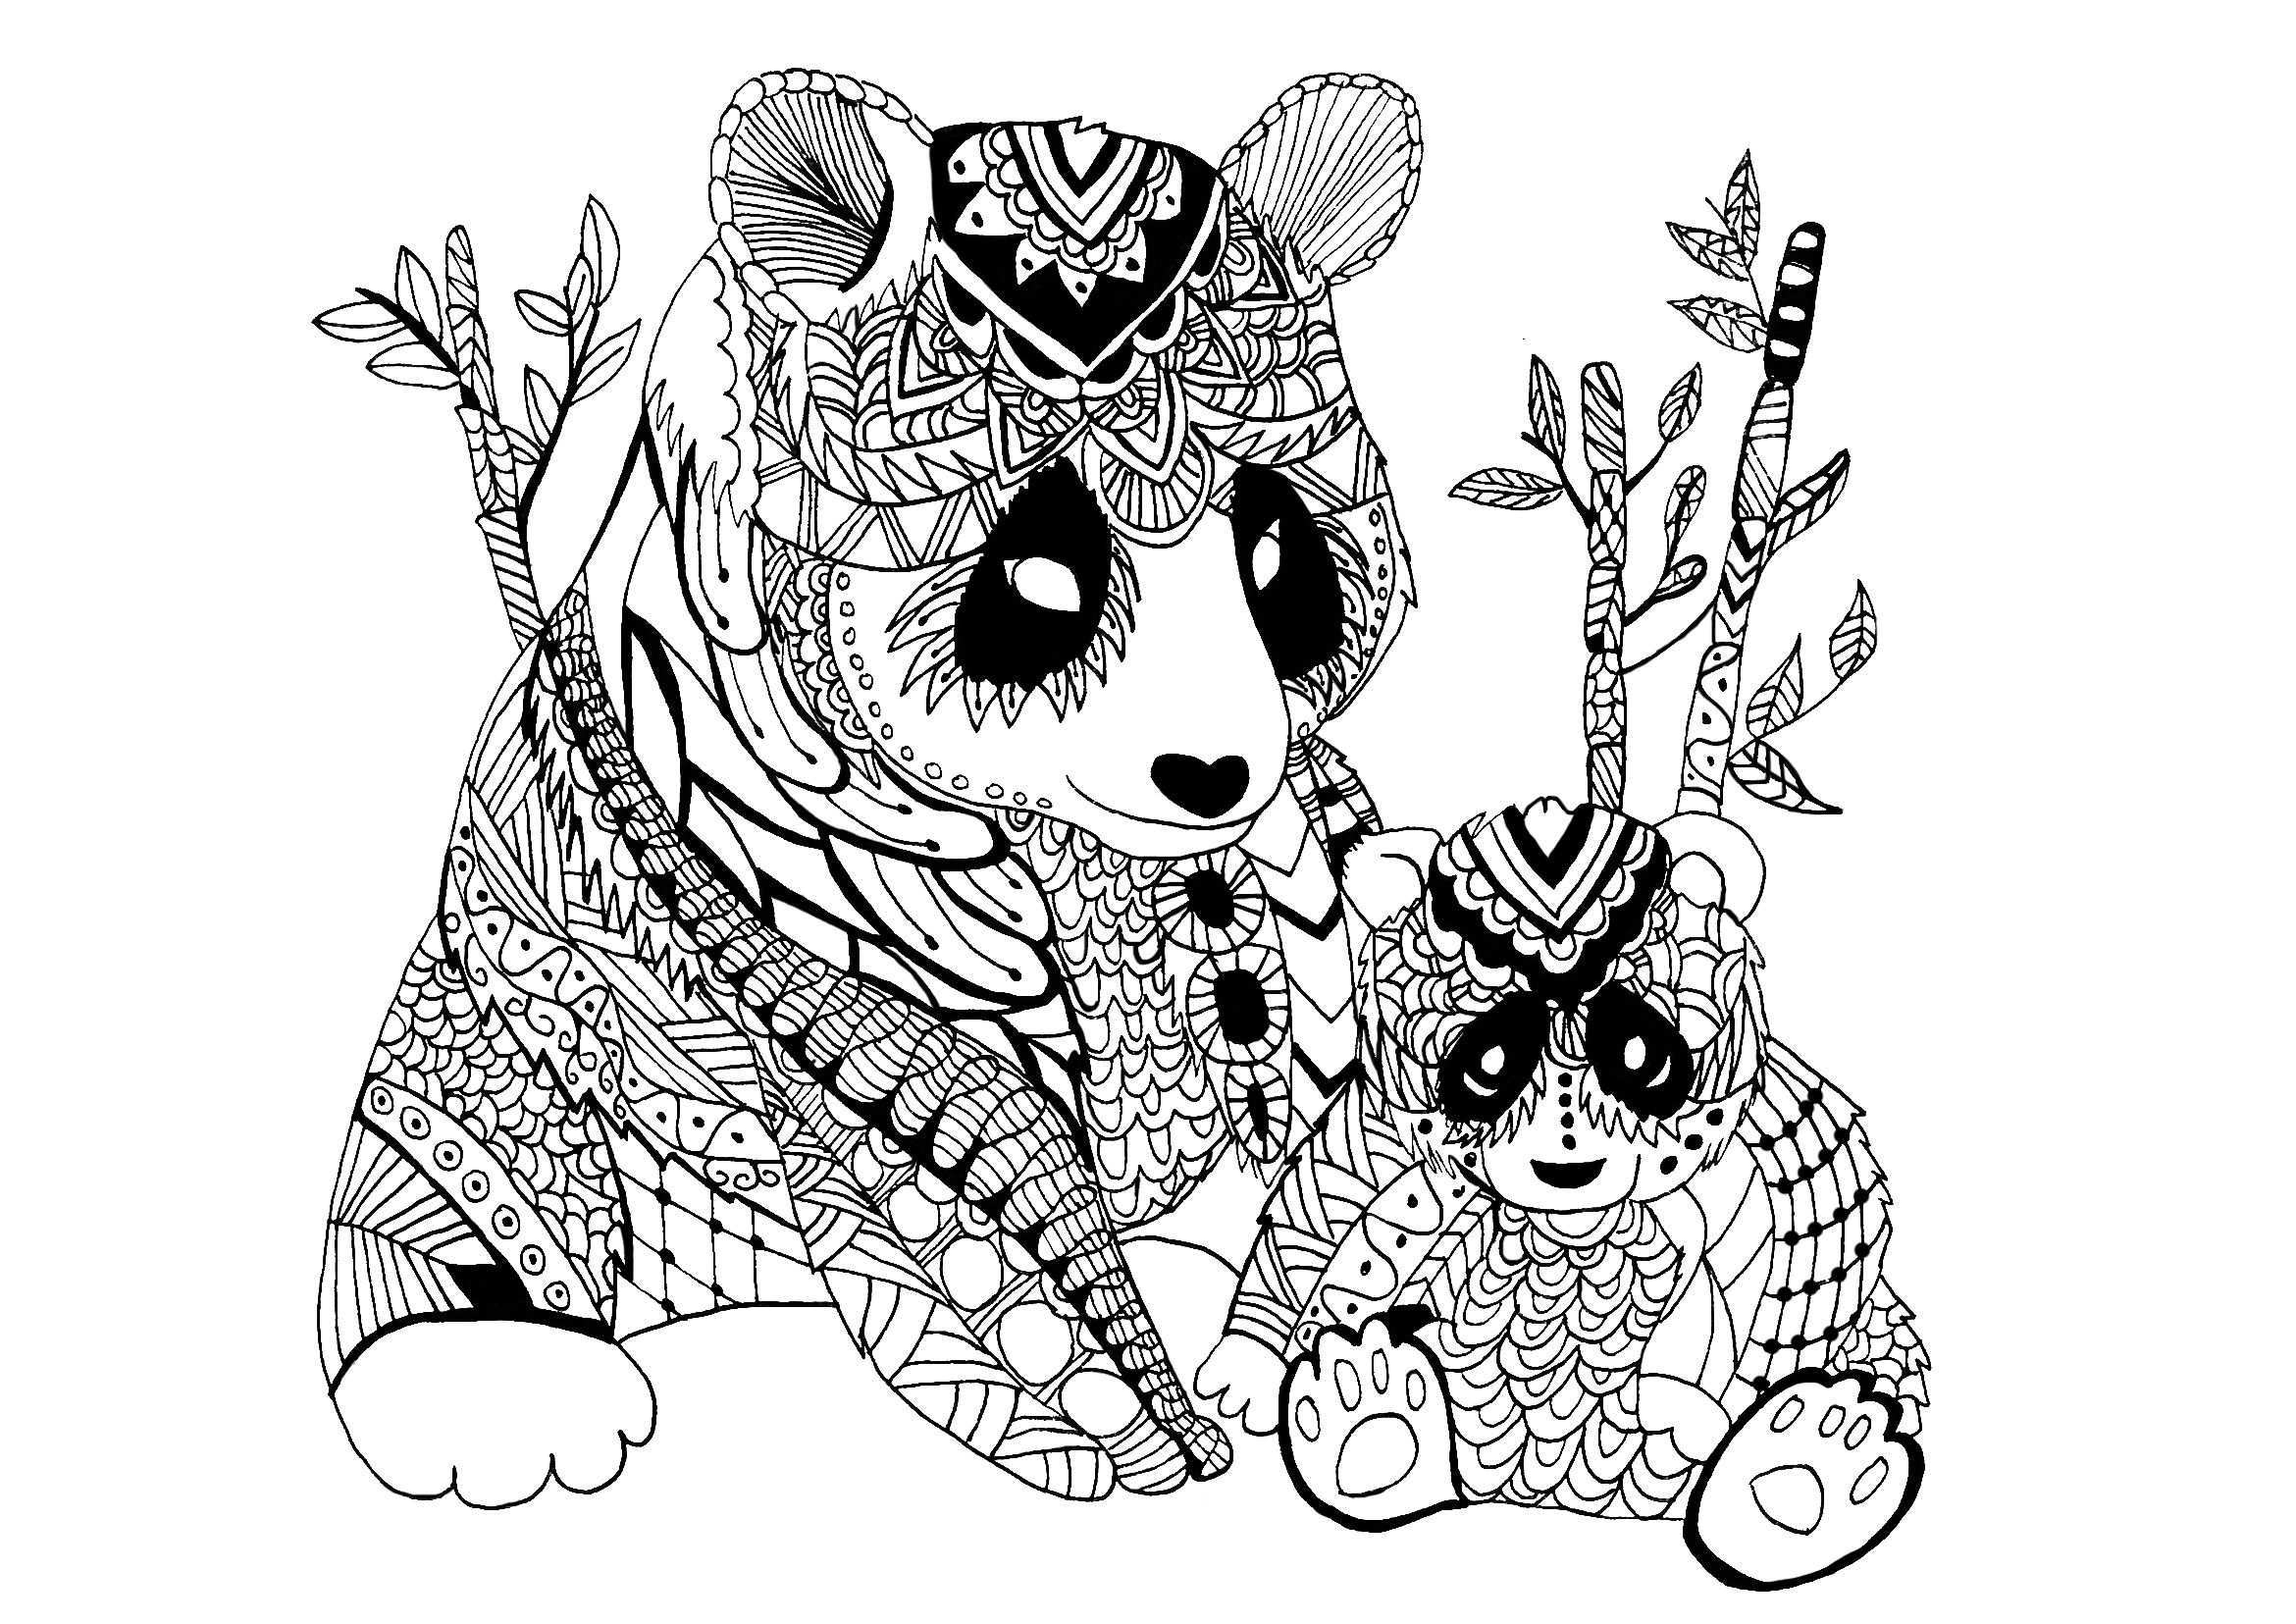 Panda Coloring Pages For Adults Panda Coloring Pages Idea Panda Coloring Pages Animal Coloring Pages Bear Coloring Pages